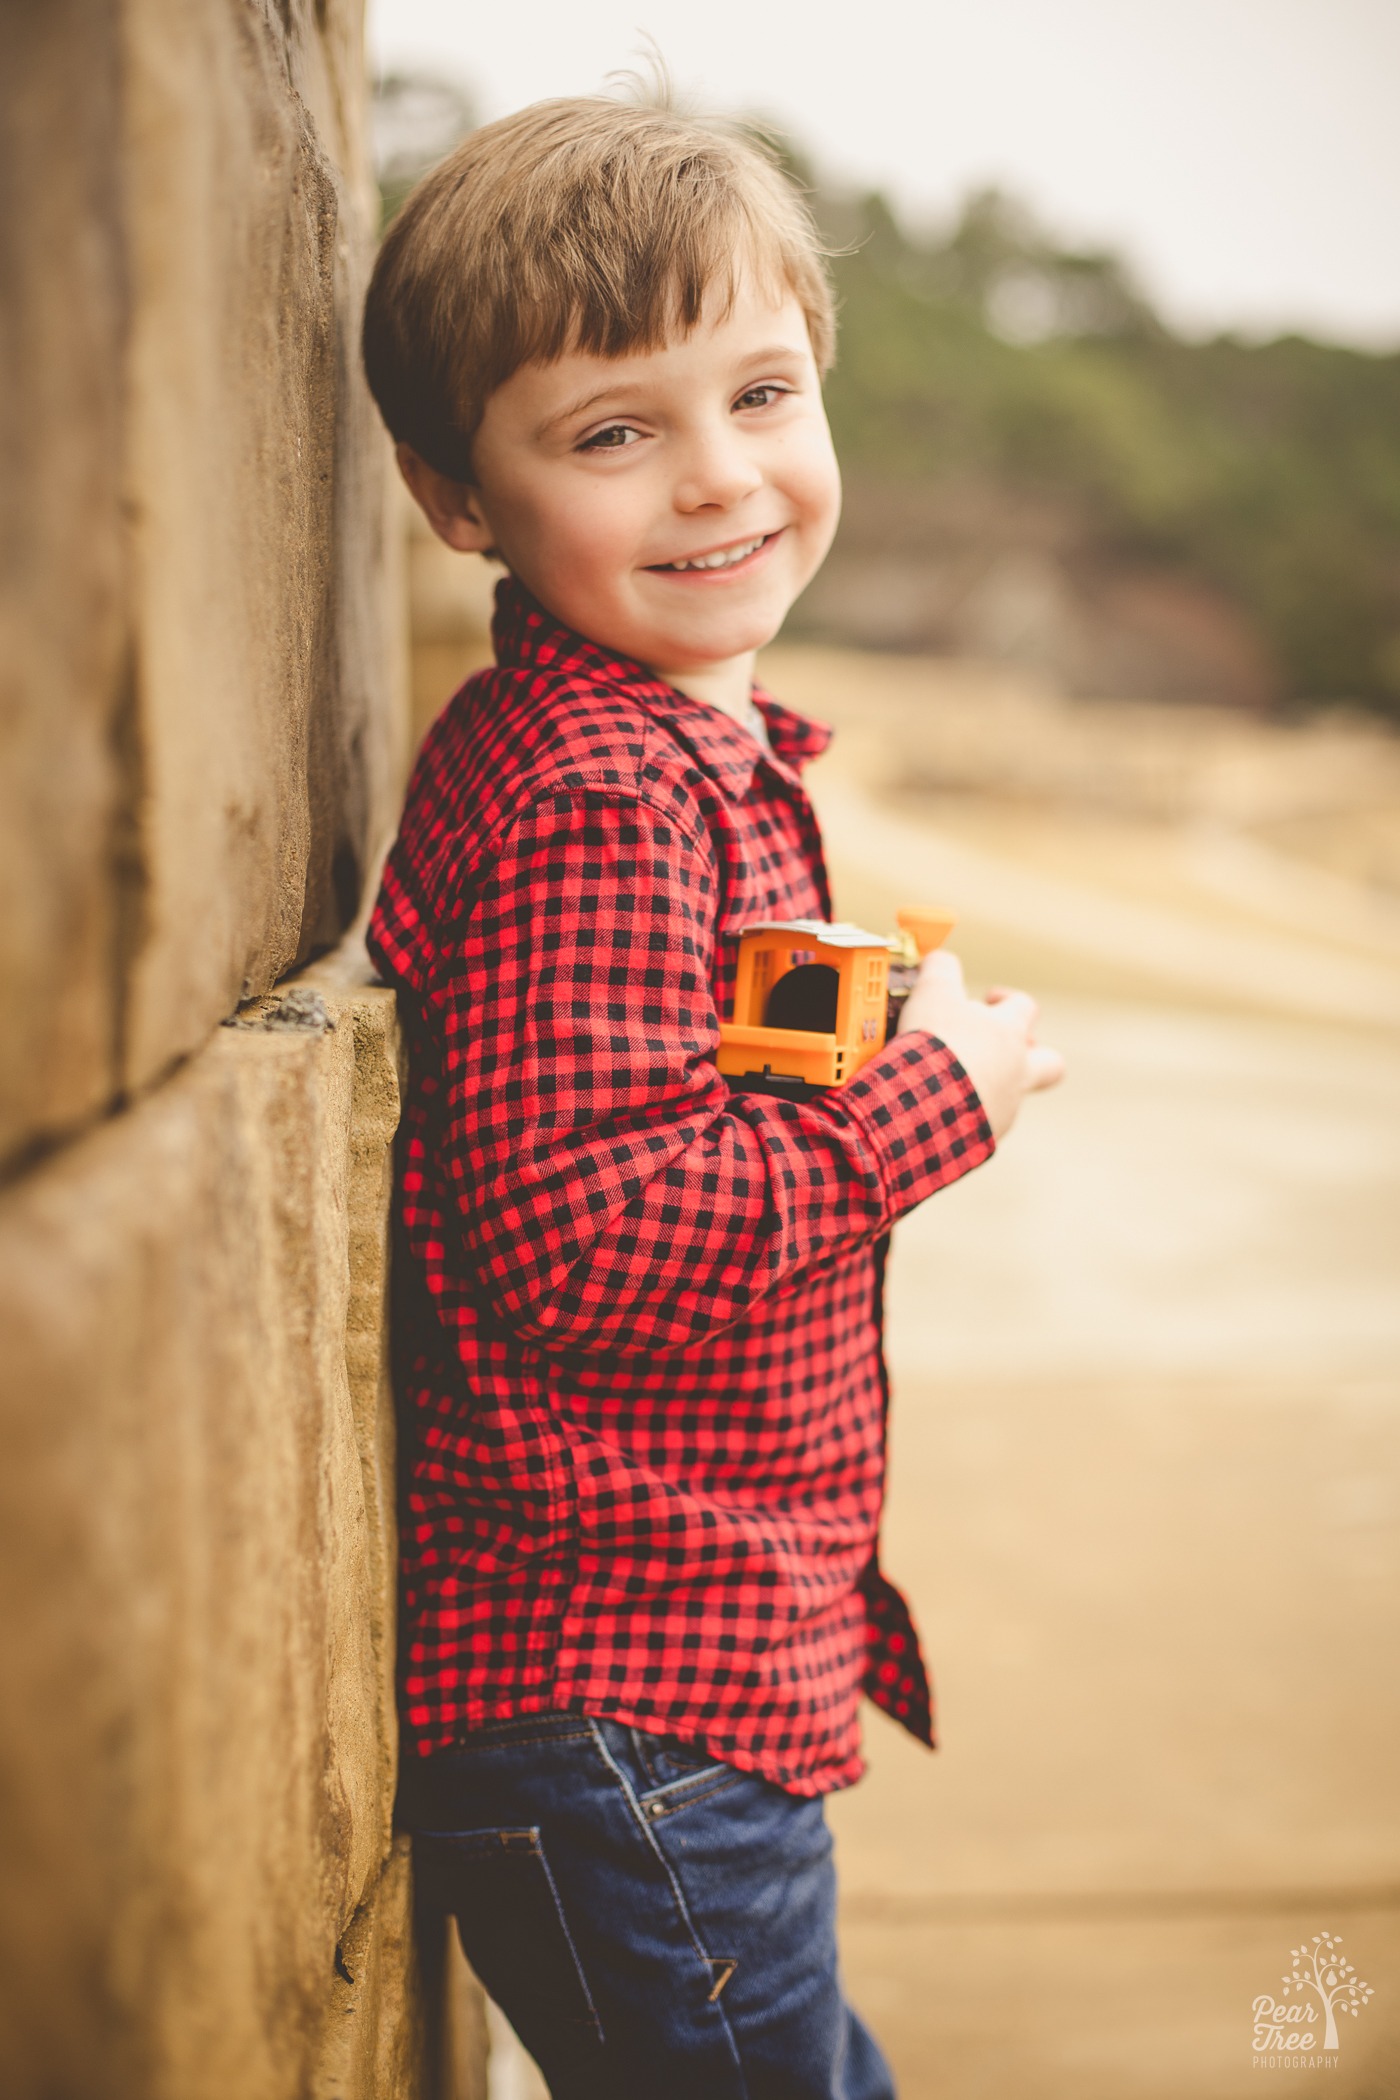 Four year old photoshoot in downtown Woodstock with the cutest little boy in a red checked shirt holding his toy train and smiling